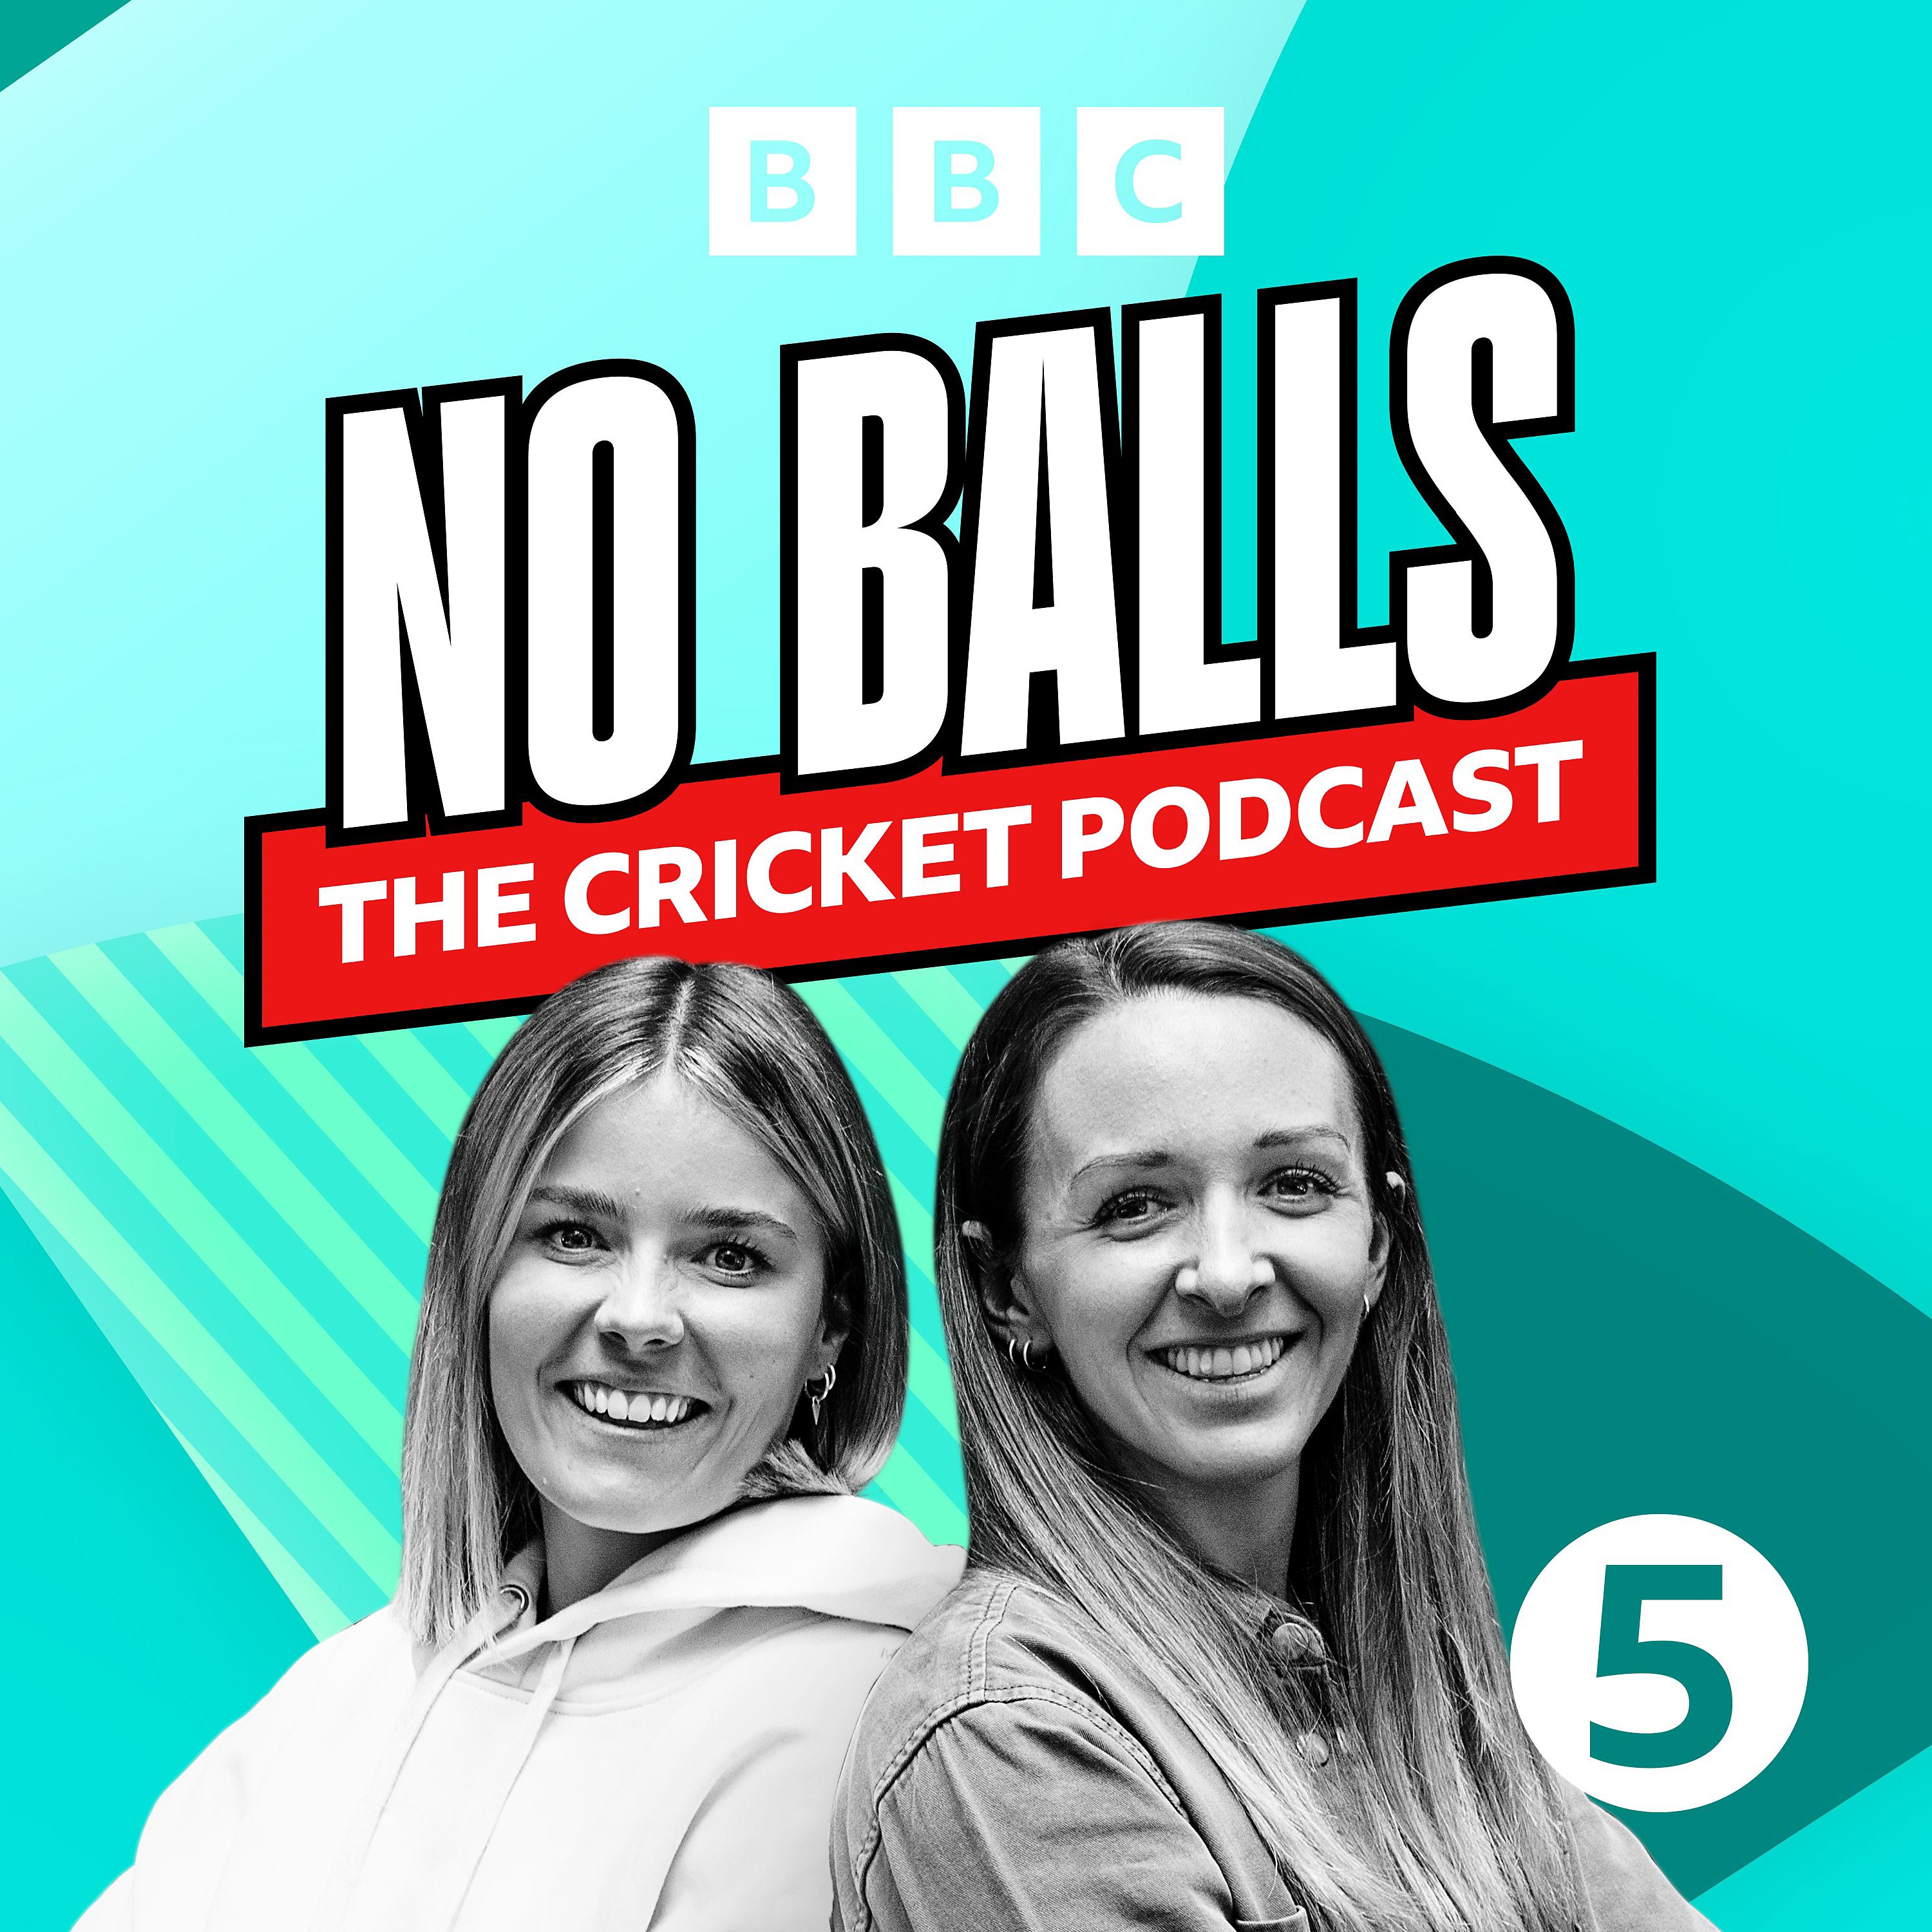 No Balls: The Cricket Podcast - End of the English cricket season and Ebony joins for a sing-song!